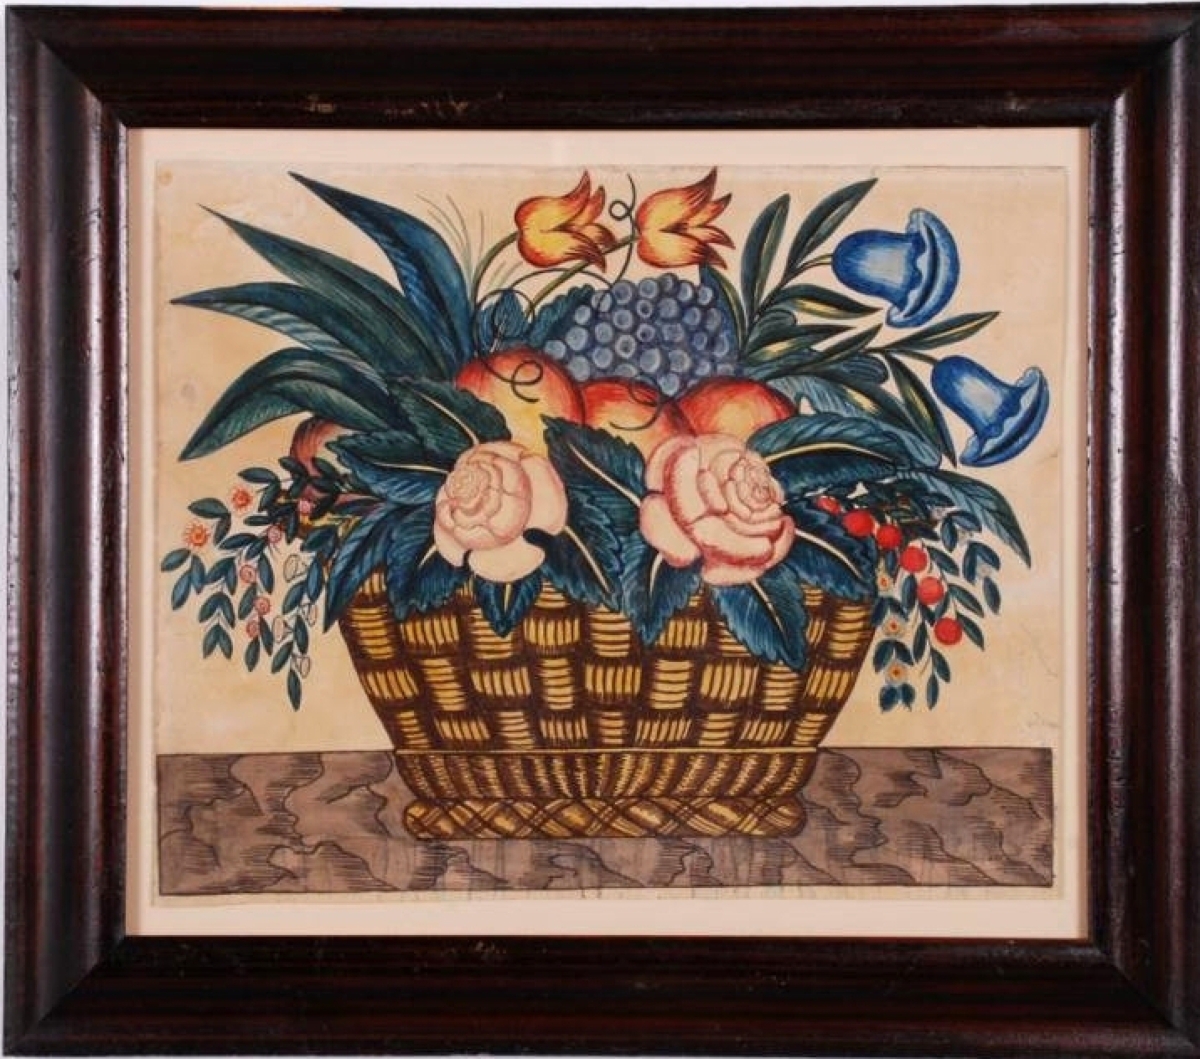 The top lot in the sale was this bright, still life watercolor, cataloged as being by Joseph H. Davis, who is better known for his detailed portraits in room settings. The still life finished at $22,800.